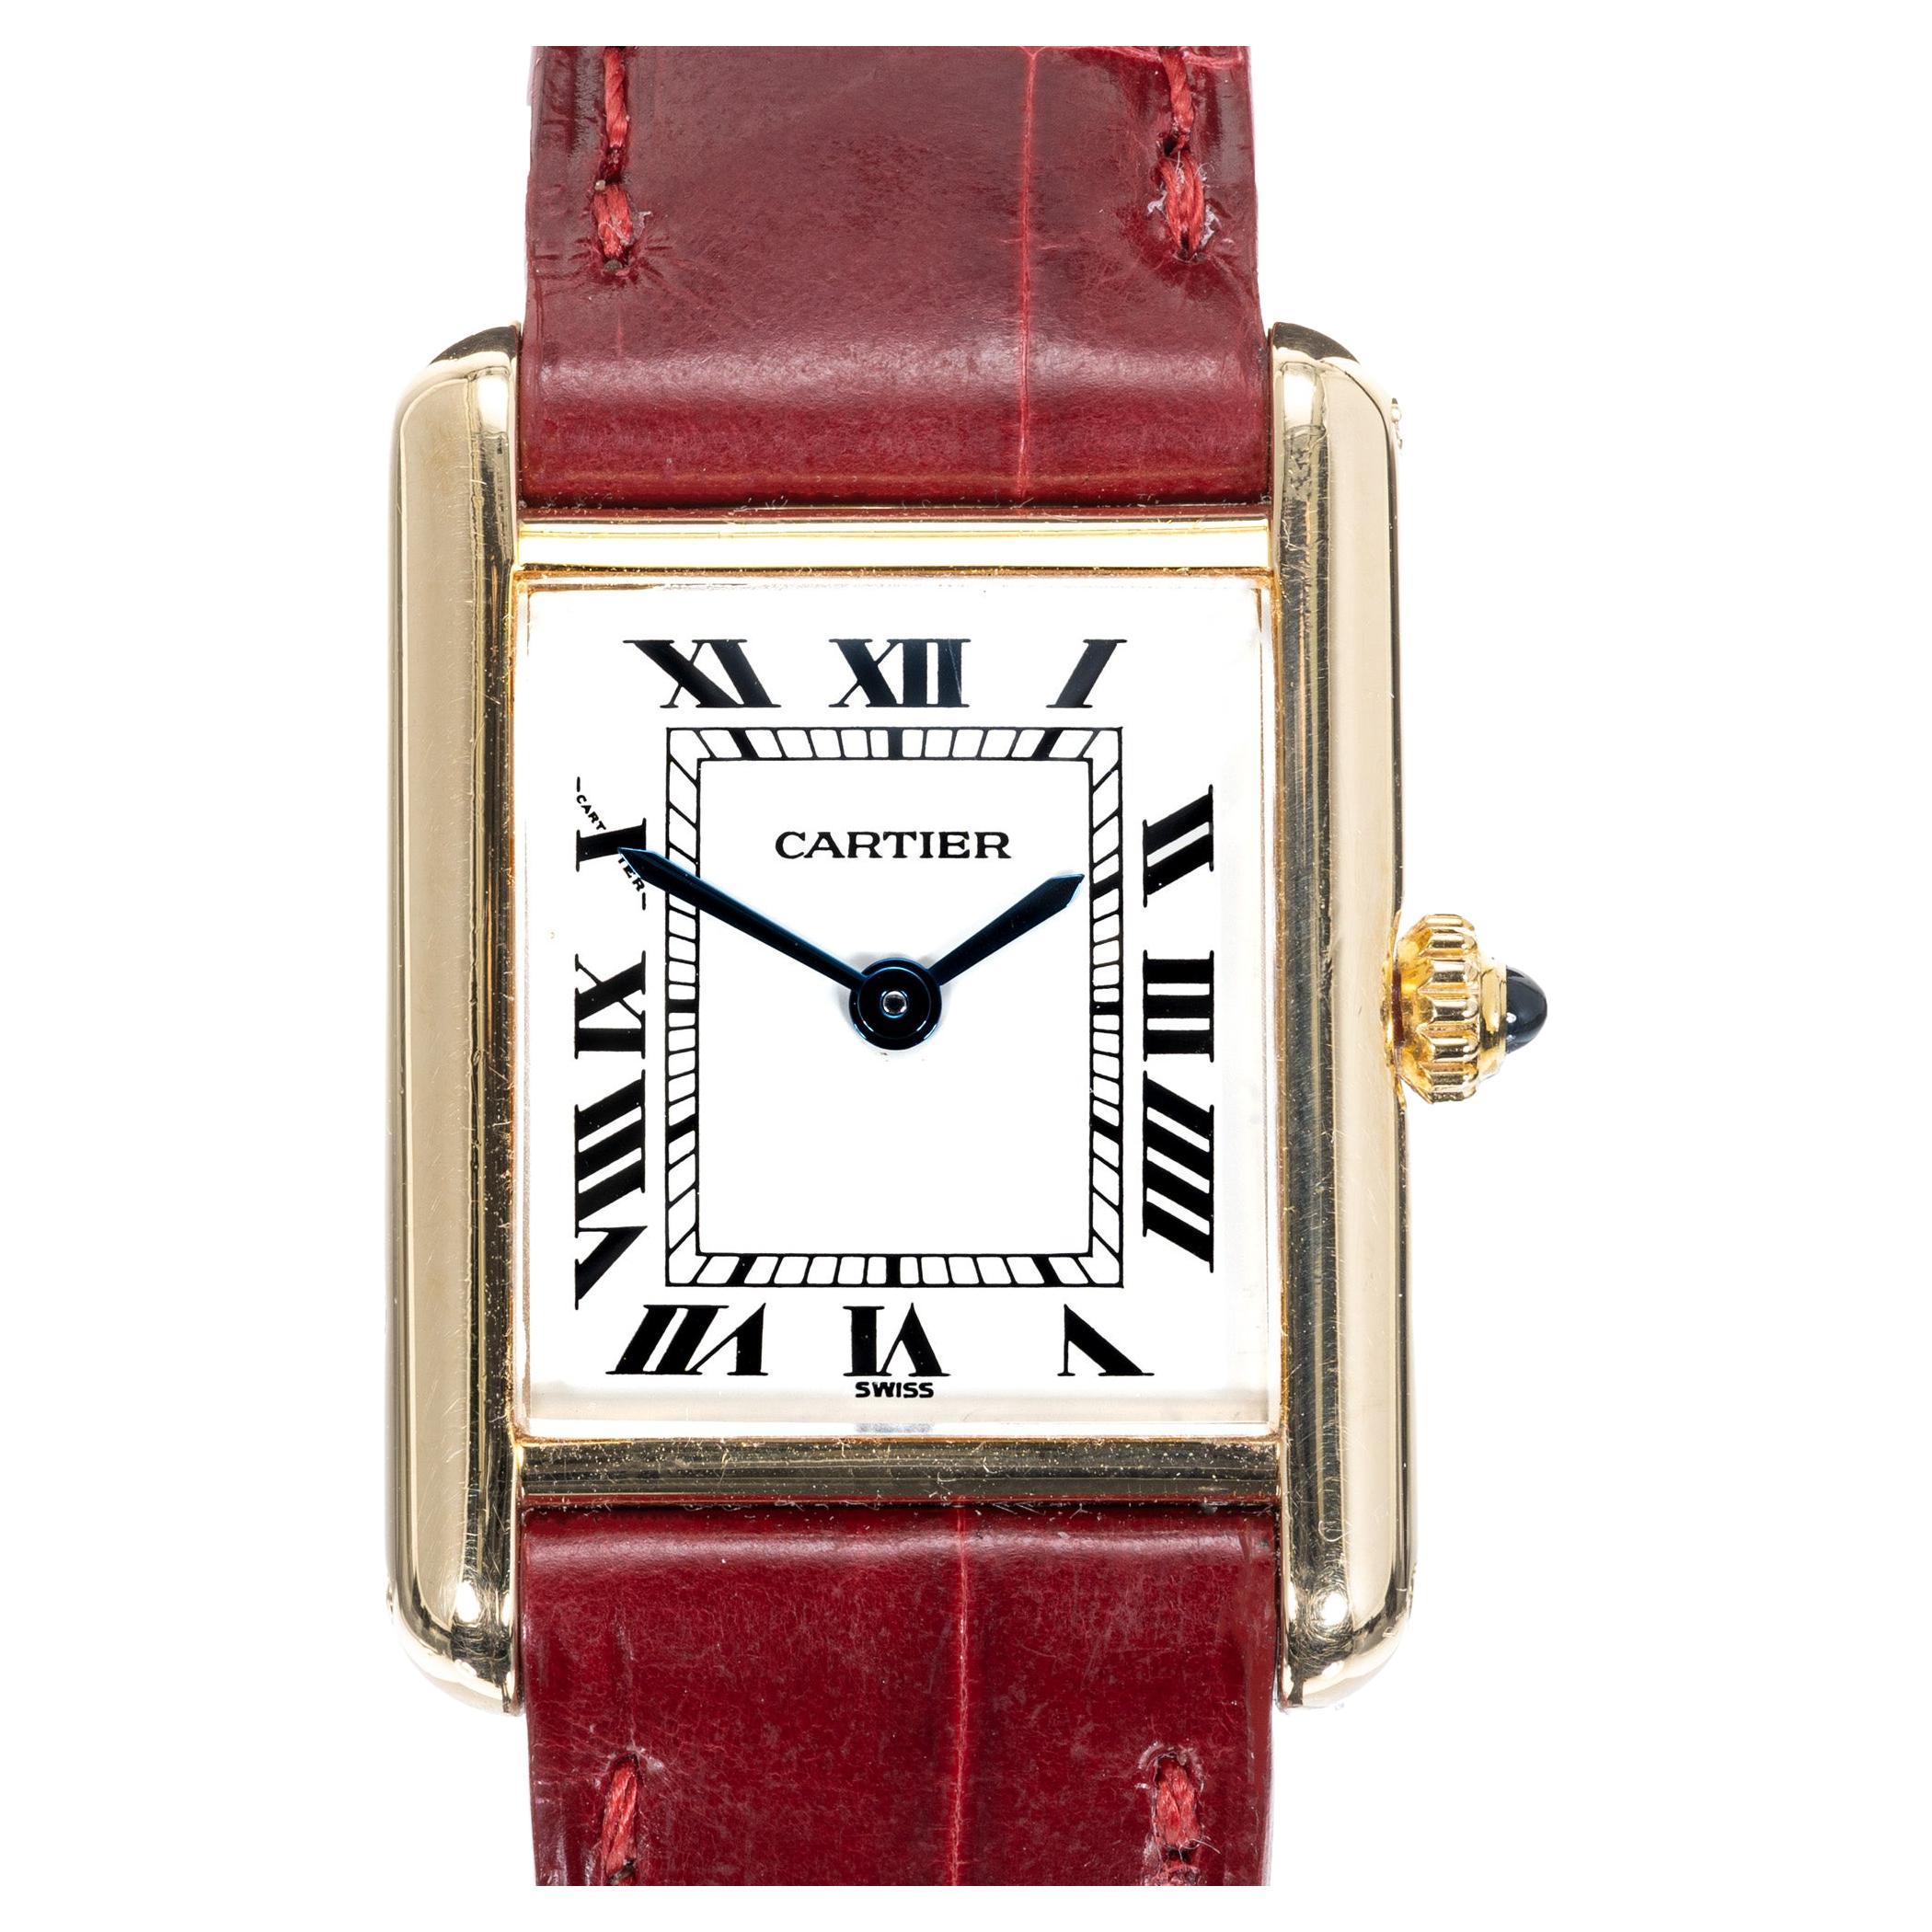 Ladies Cartier tank solo quartz wristwatch with Roman numerals. 18k yellow gold deployant buckle. 

Length: 28mm
Width: 20mm
Band width at case: 15mm
Case thickness: 6.5mm
Band: Original Cartier
Crystal: Sapphire
Dial: Parchment Roman